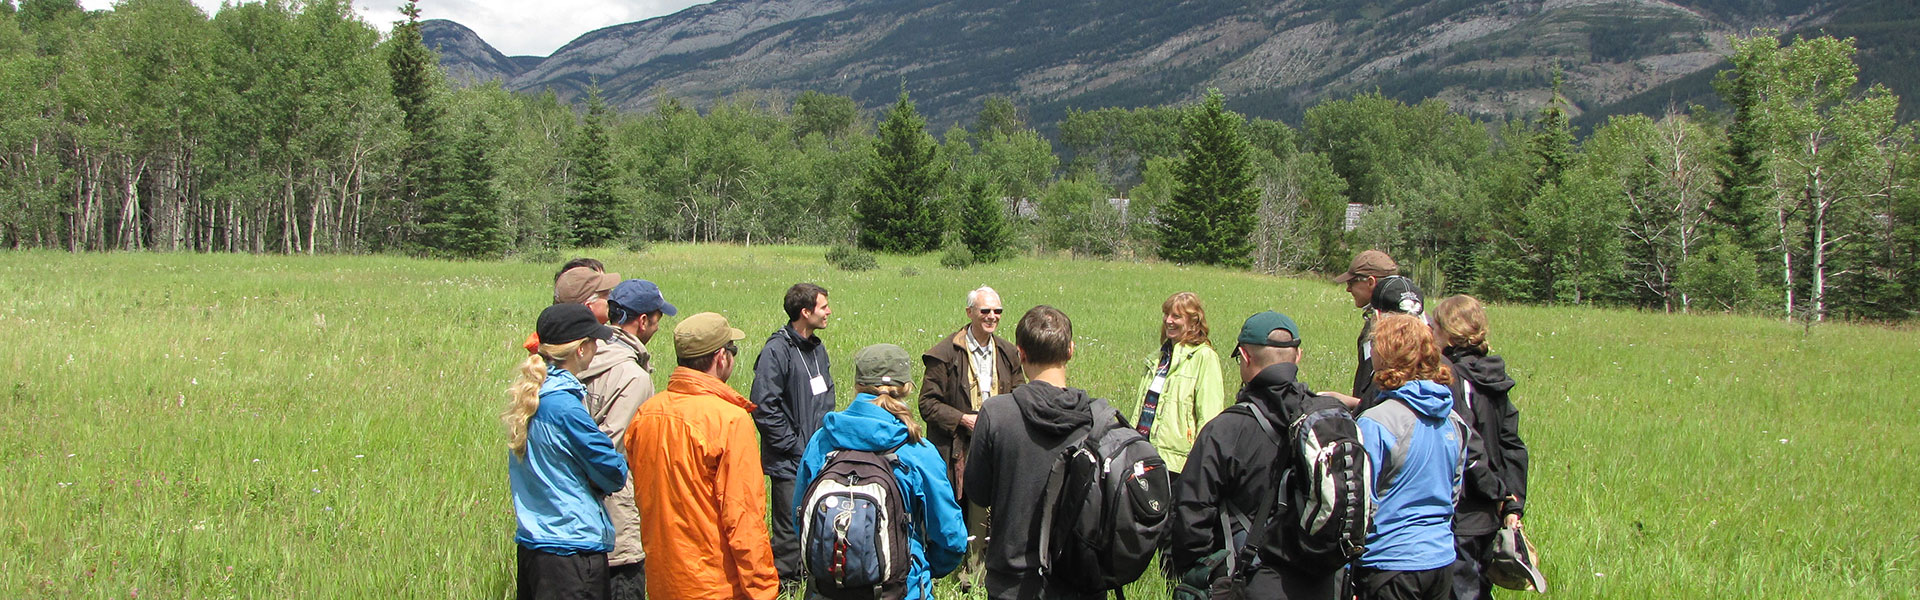 group of people standing in a circle in a mountain meadow